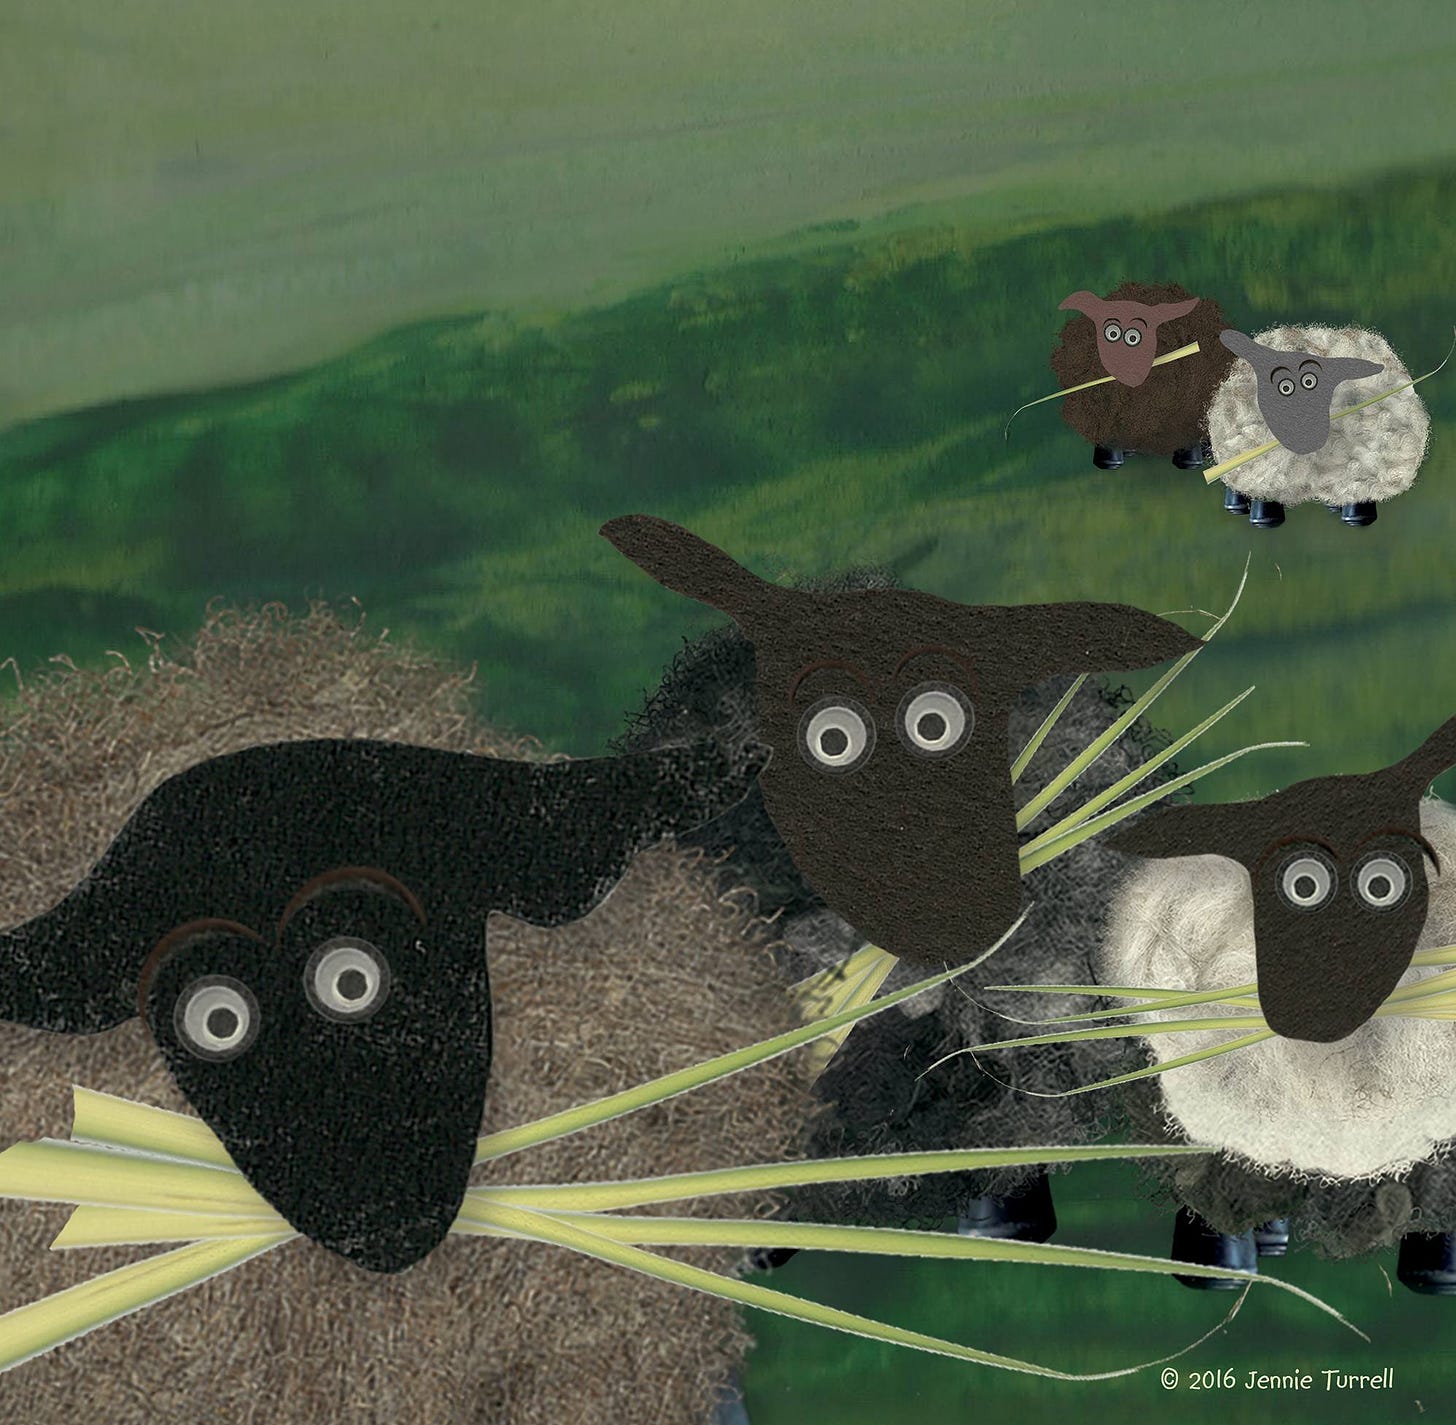 An image of illustrated sheep holding palm branches in the style of Jennie Turrell’s Let Us Pray, a book about the Eucharist for children.